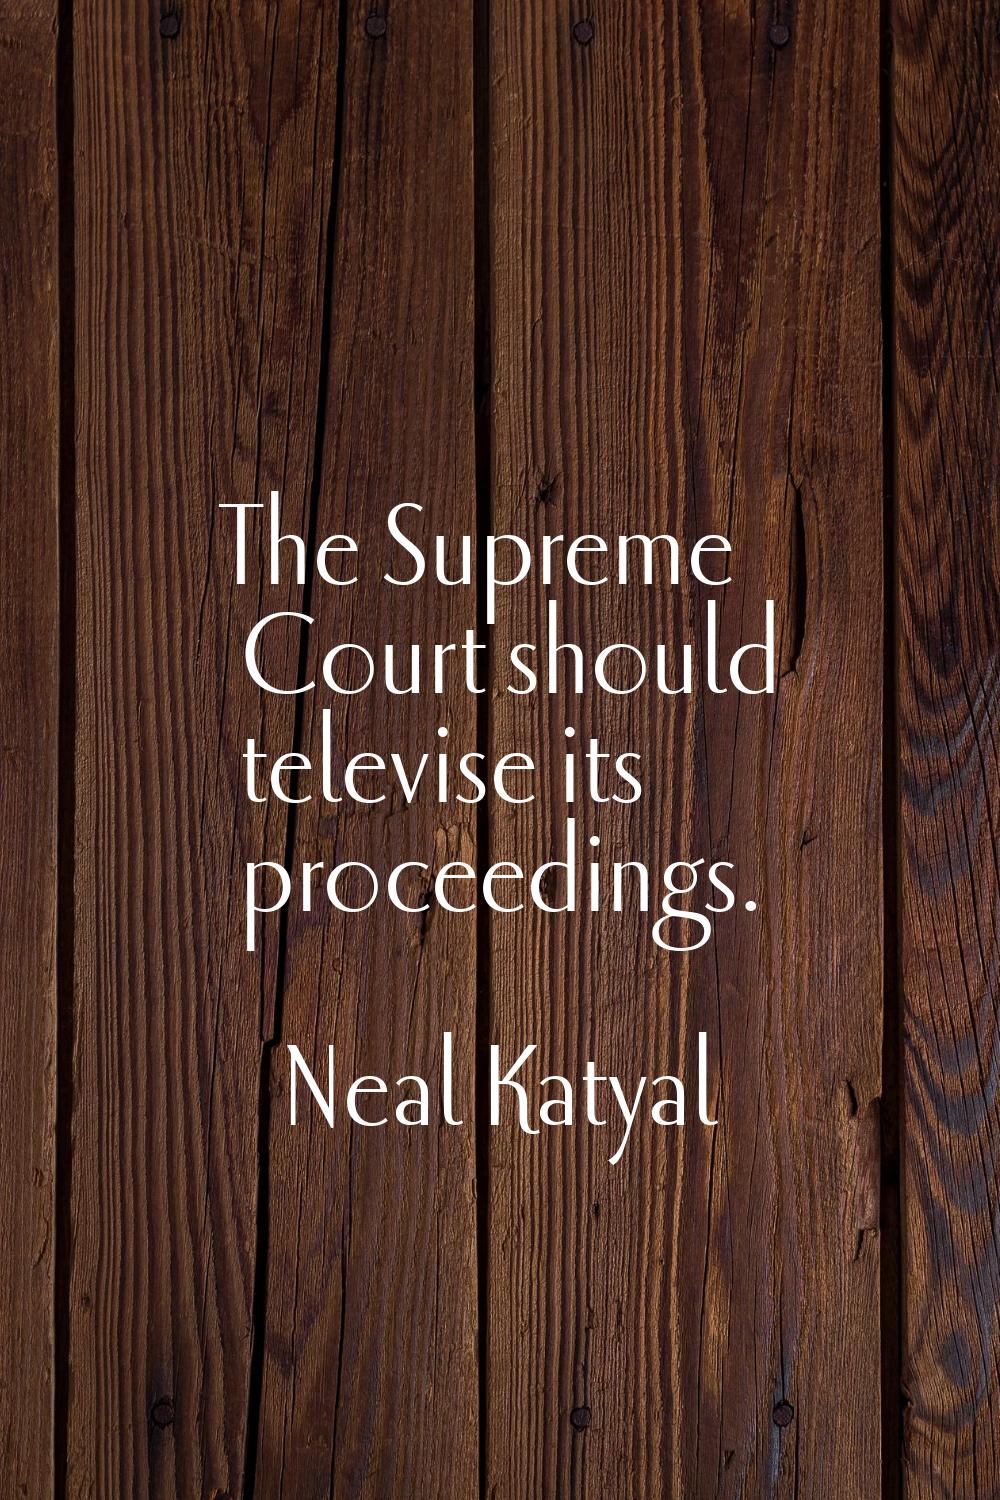 The Supreme Court should televise its proceedings.